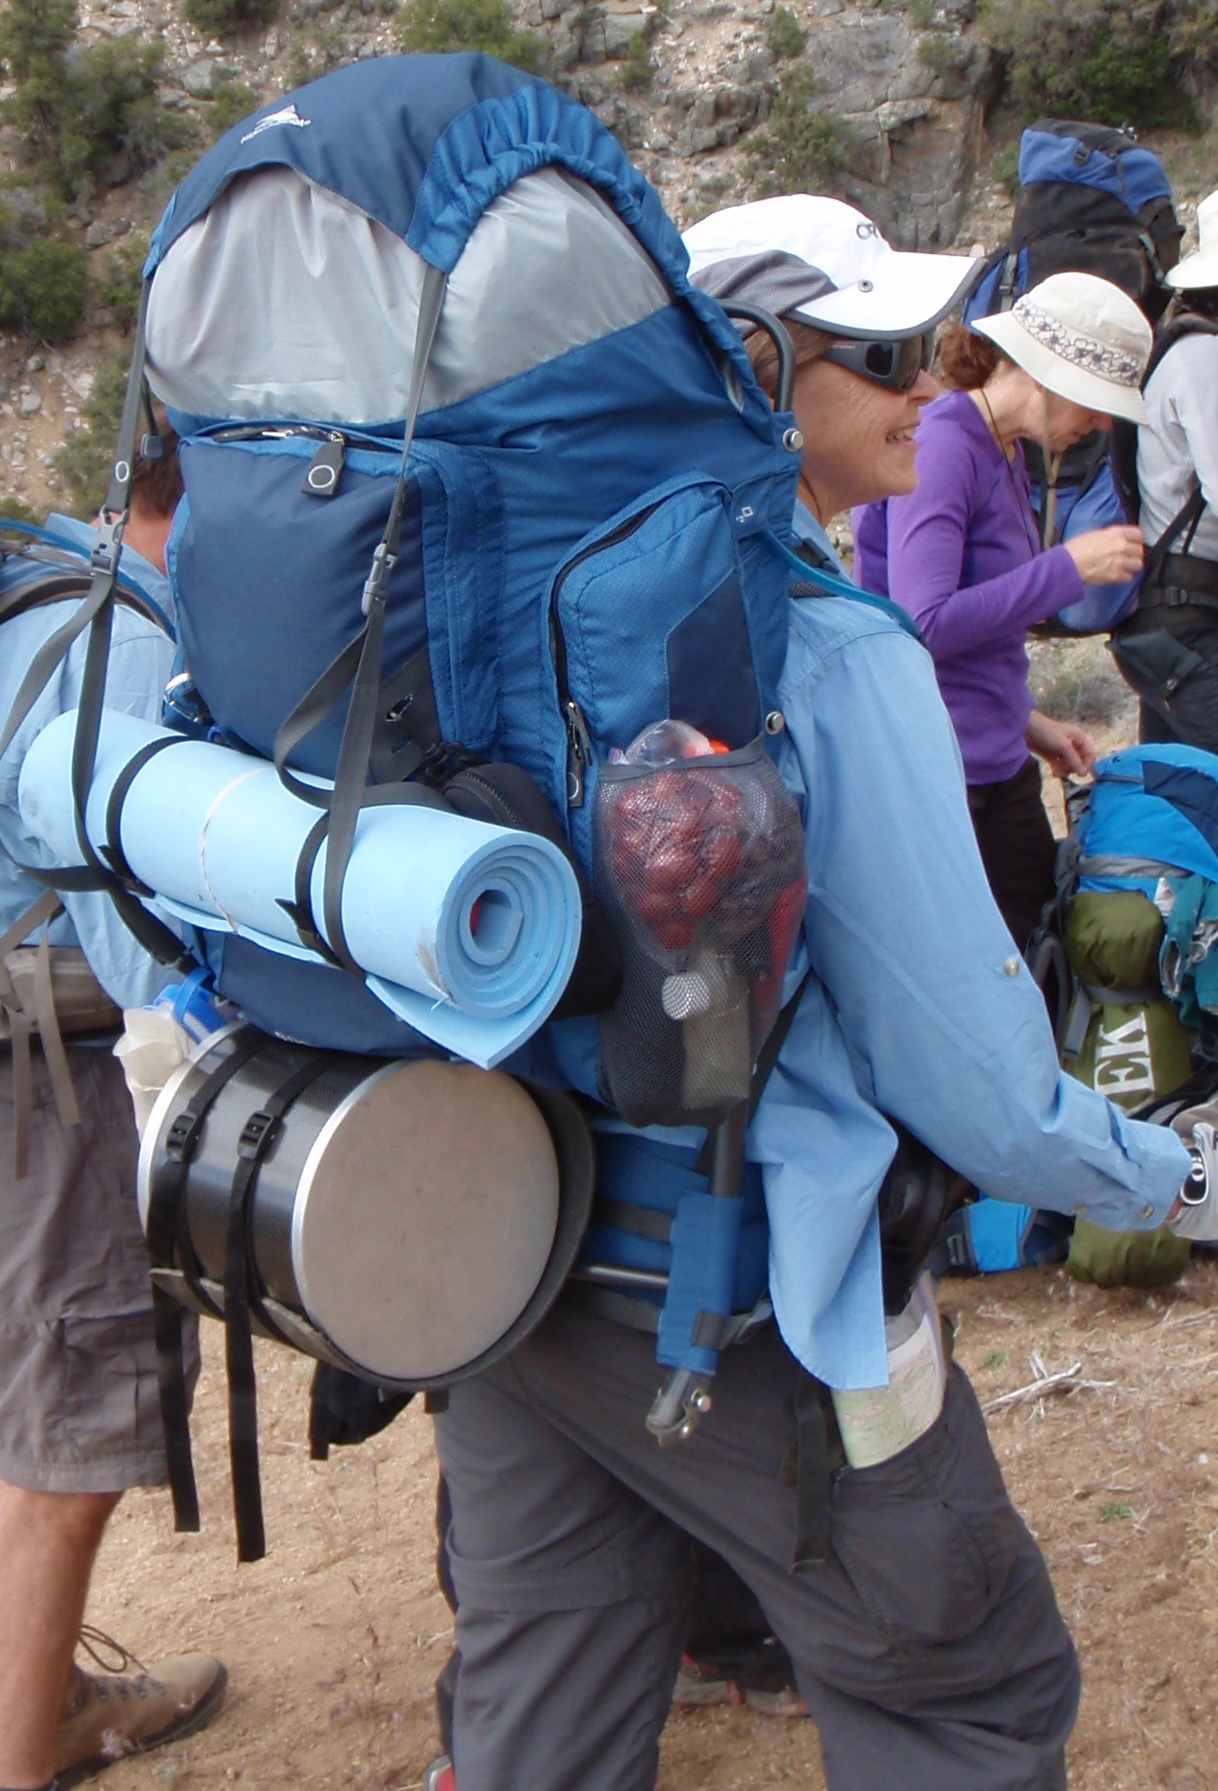 Pack carrying 42 lb (19 Kg)